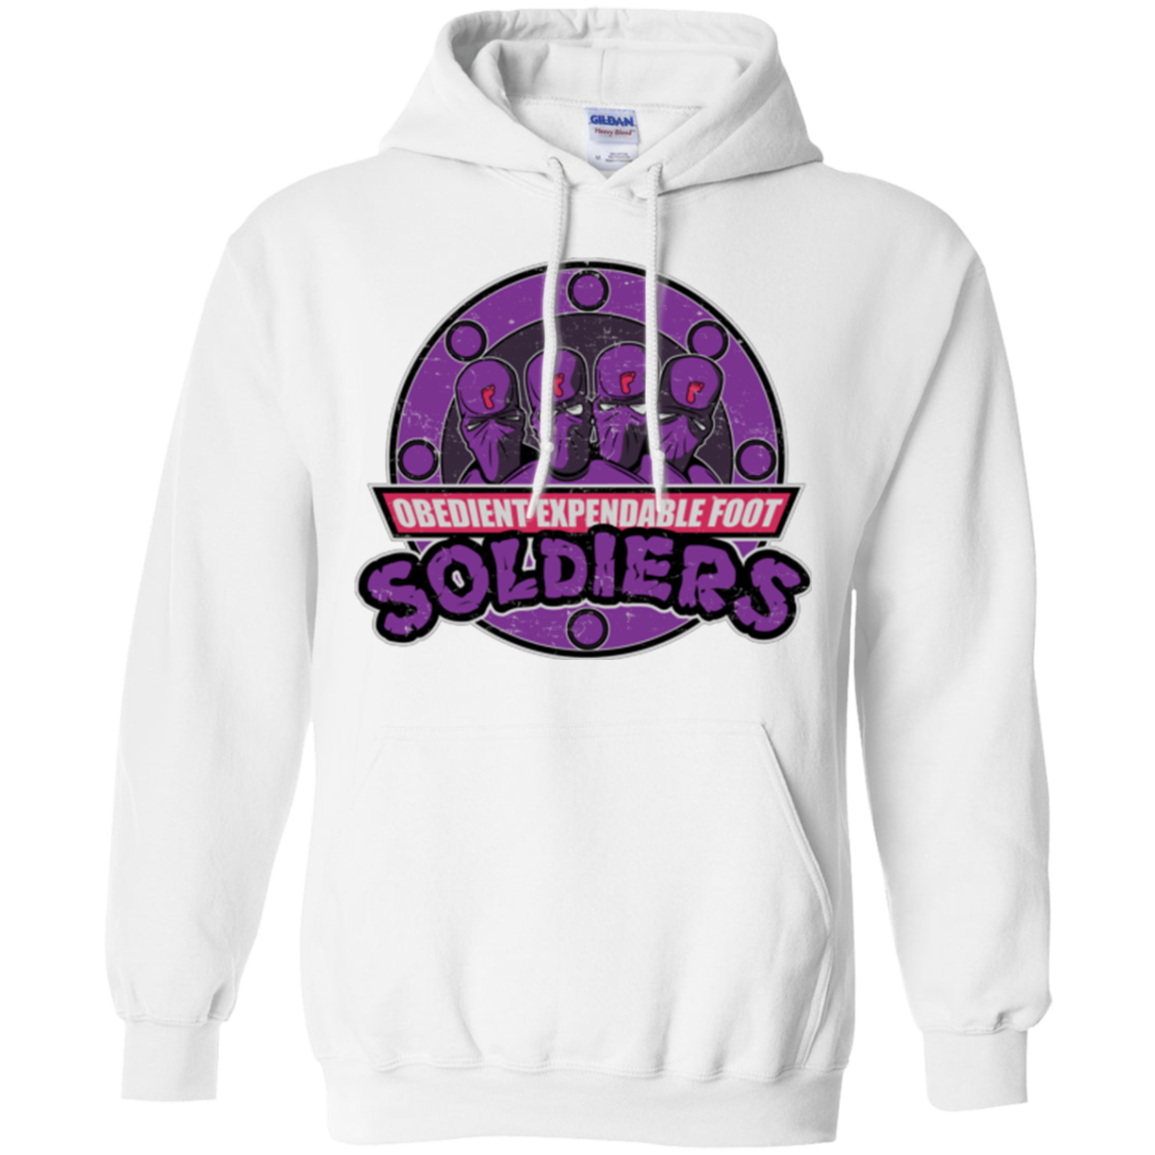 OBEDIENT EXPENDABLE FOOT SOLDIERS Pullover Hoodie